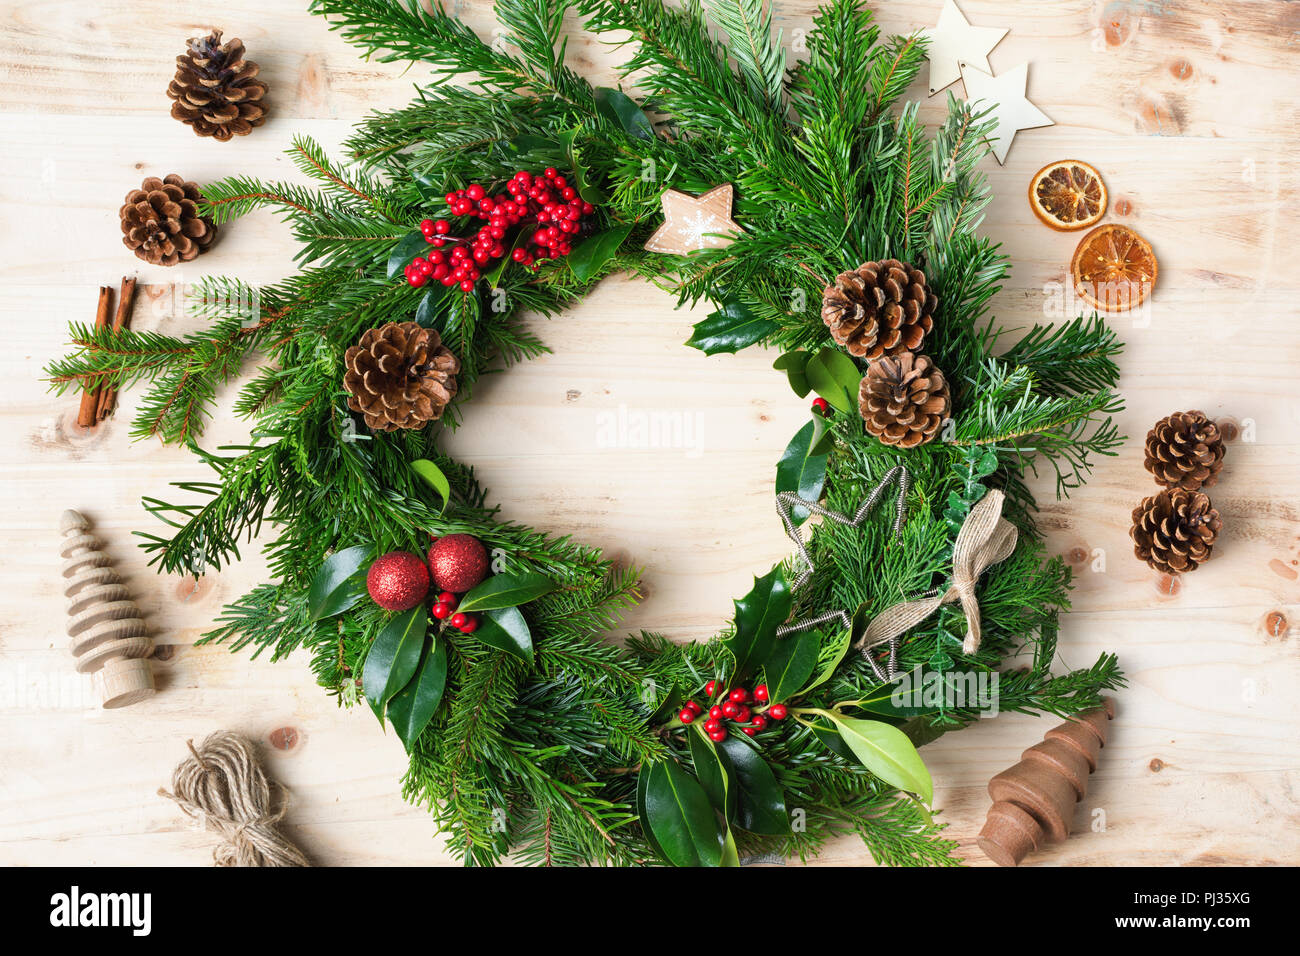 Red baubles, berries, fir branch and pine cone - Stock